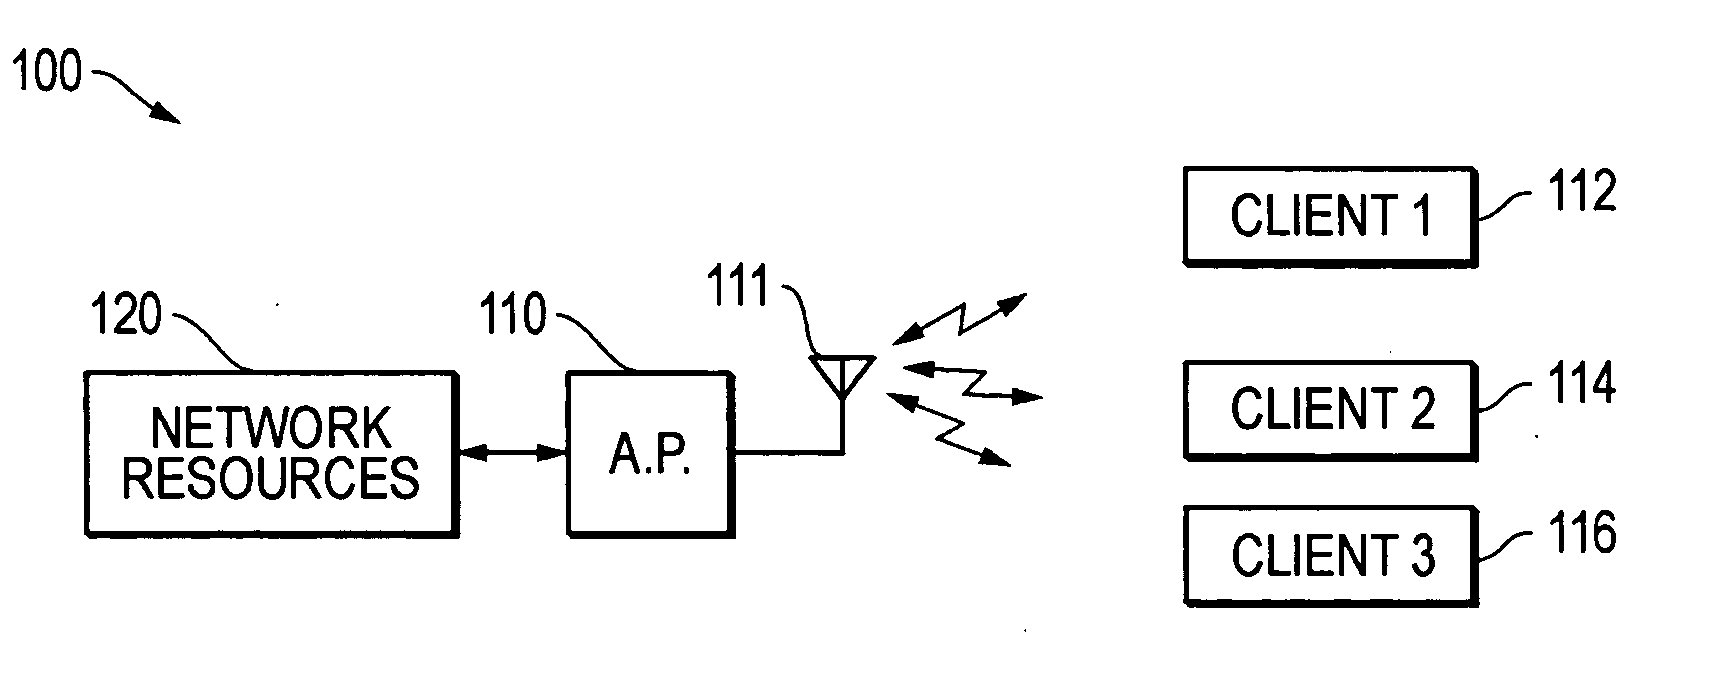 Virtual access point for configuration of a LAN